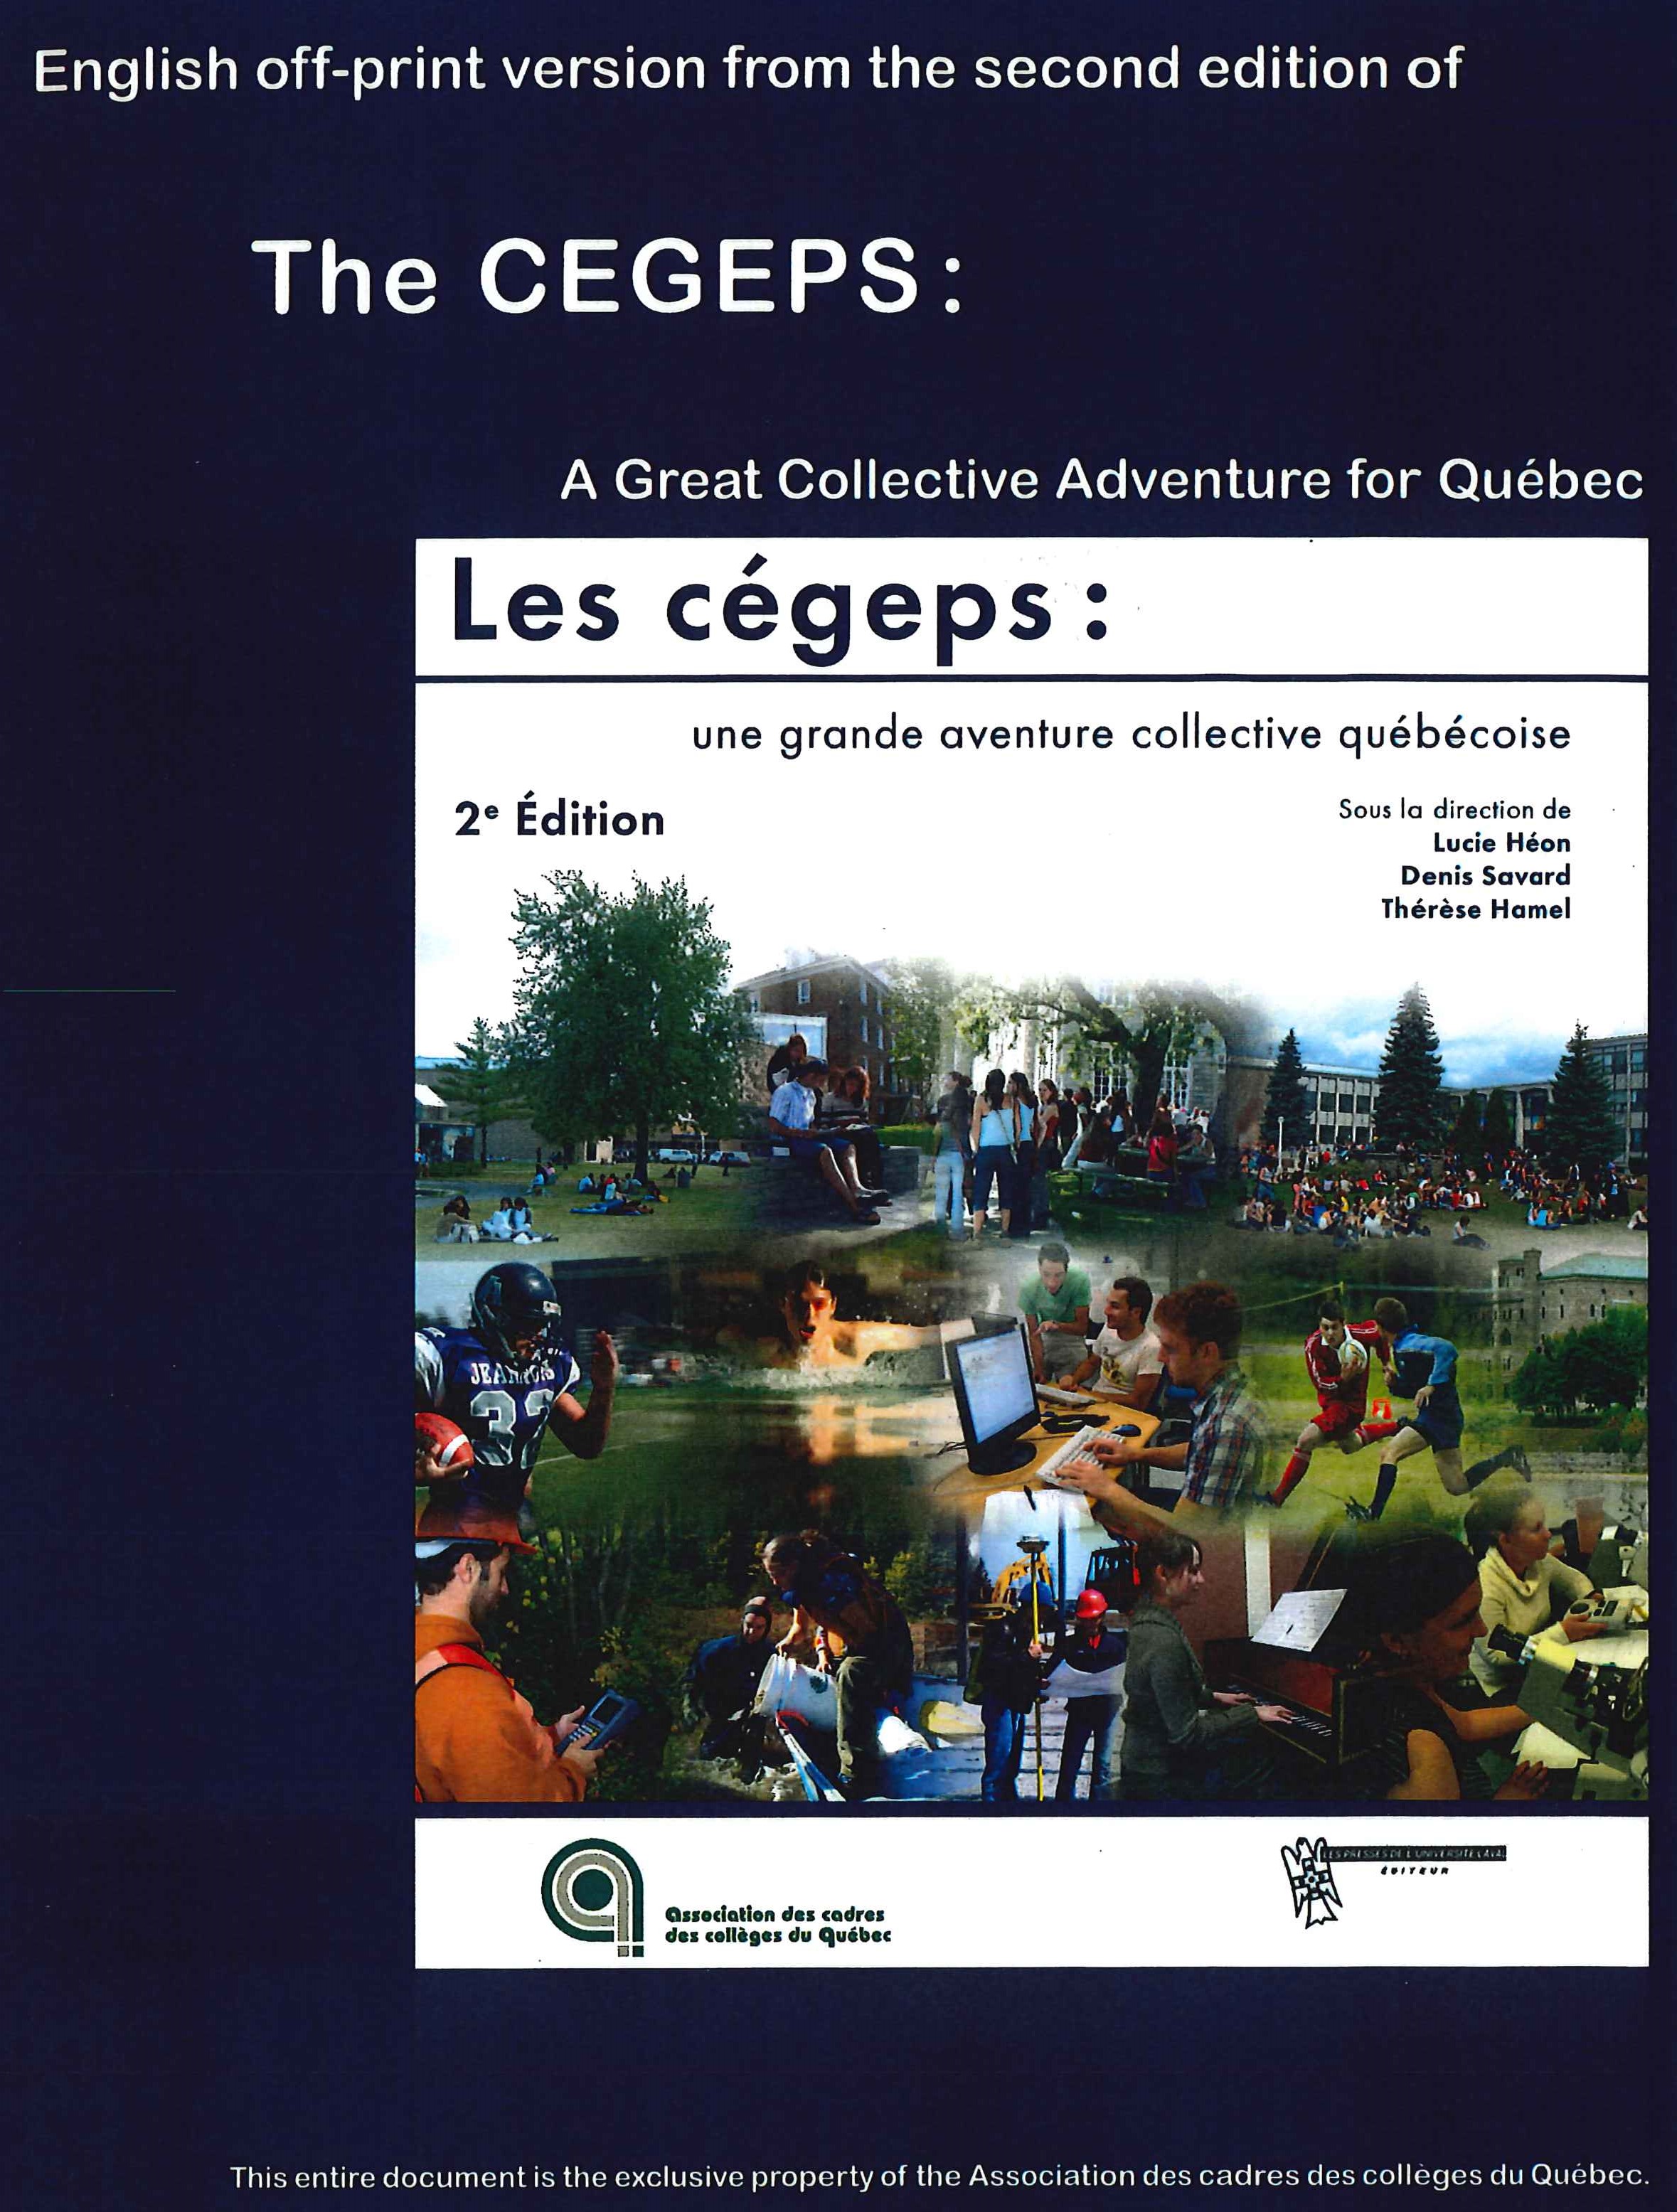 English off-print version of the second edition of The CEGEPS : a Great Collective Adventure for Québec